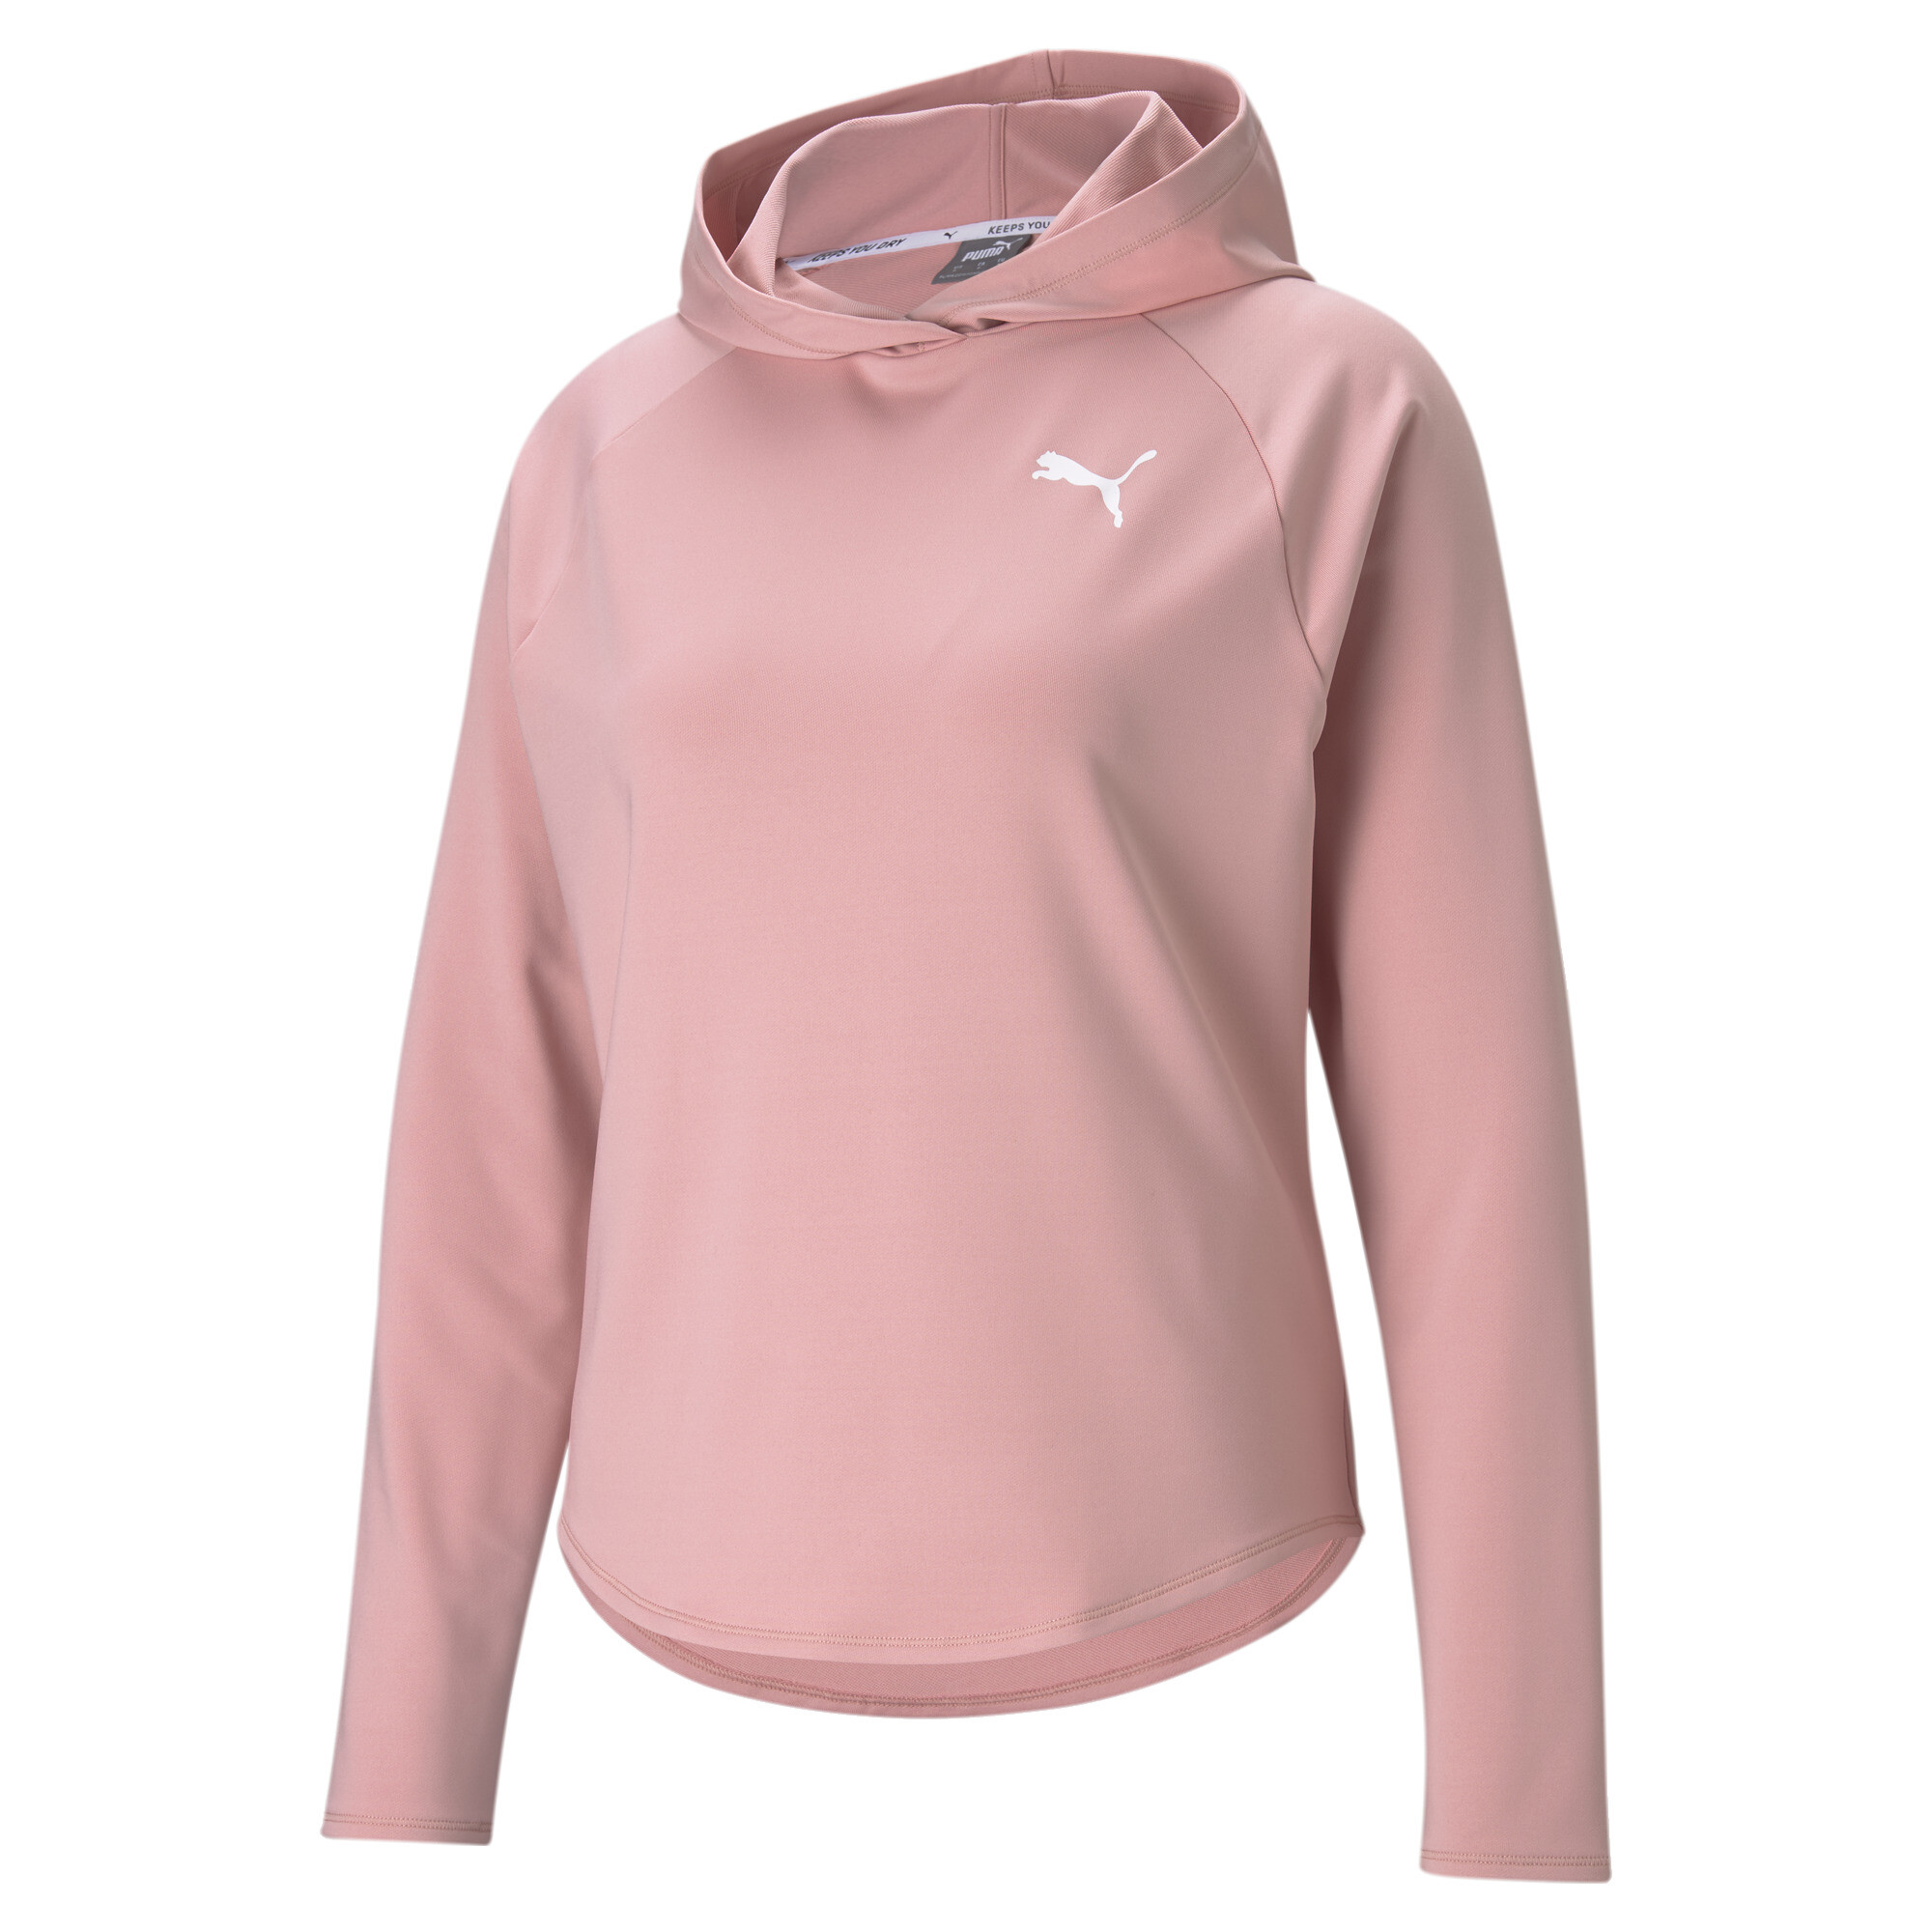 Women's Puma Active's Hoodie, Pink, Size M, Clothing